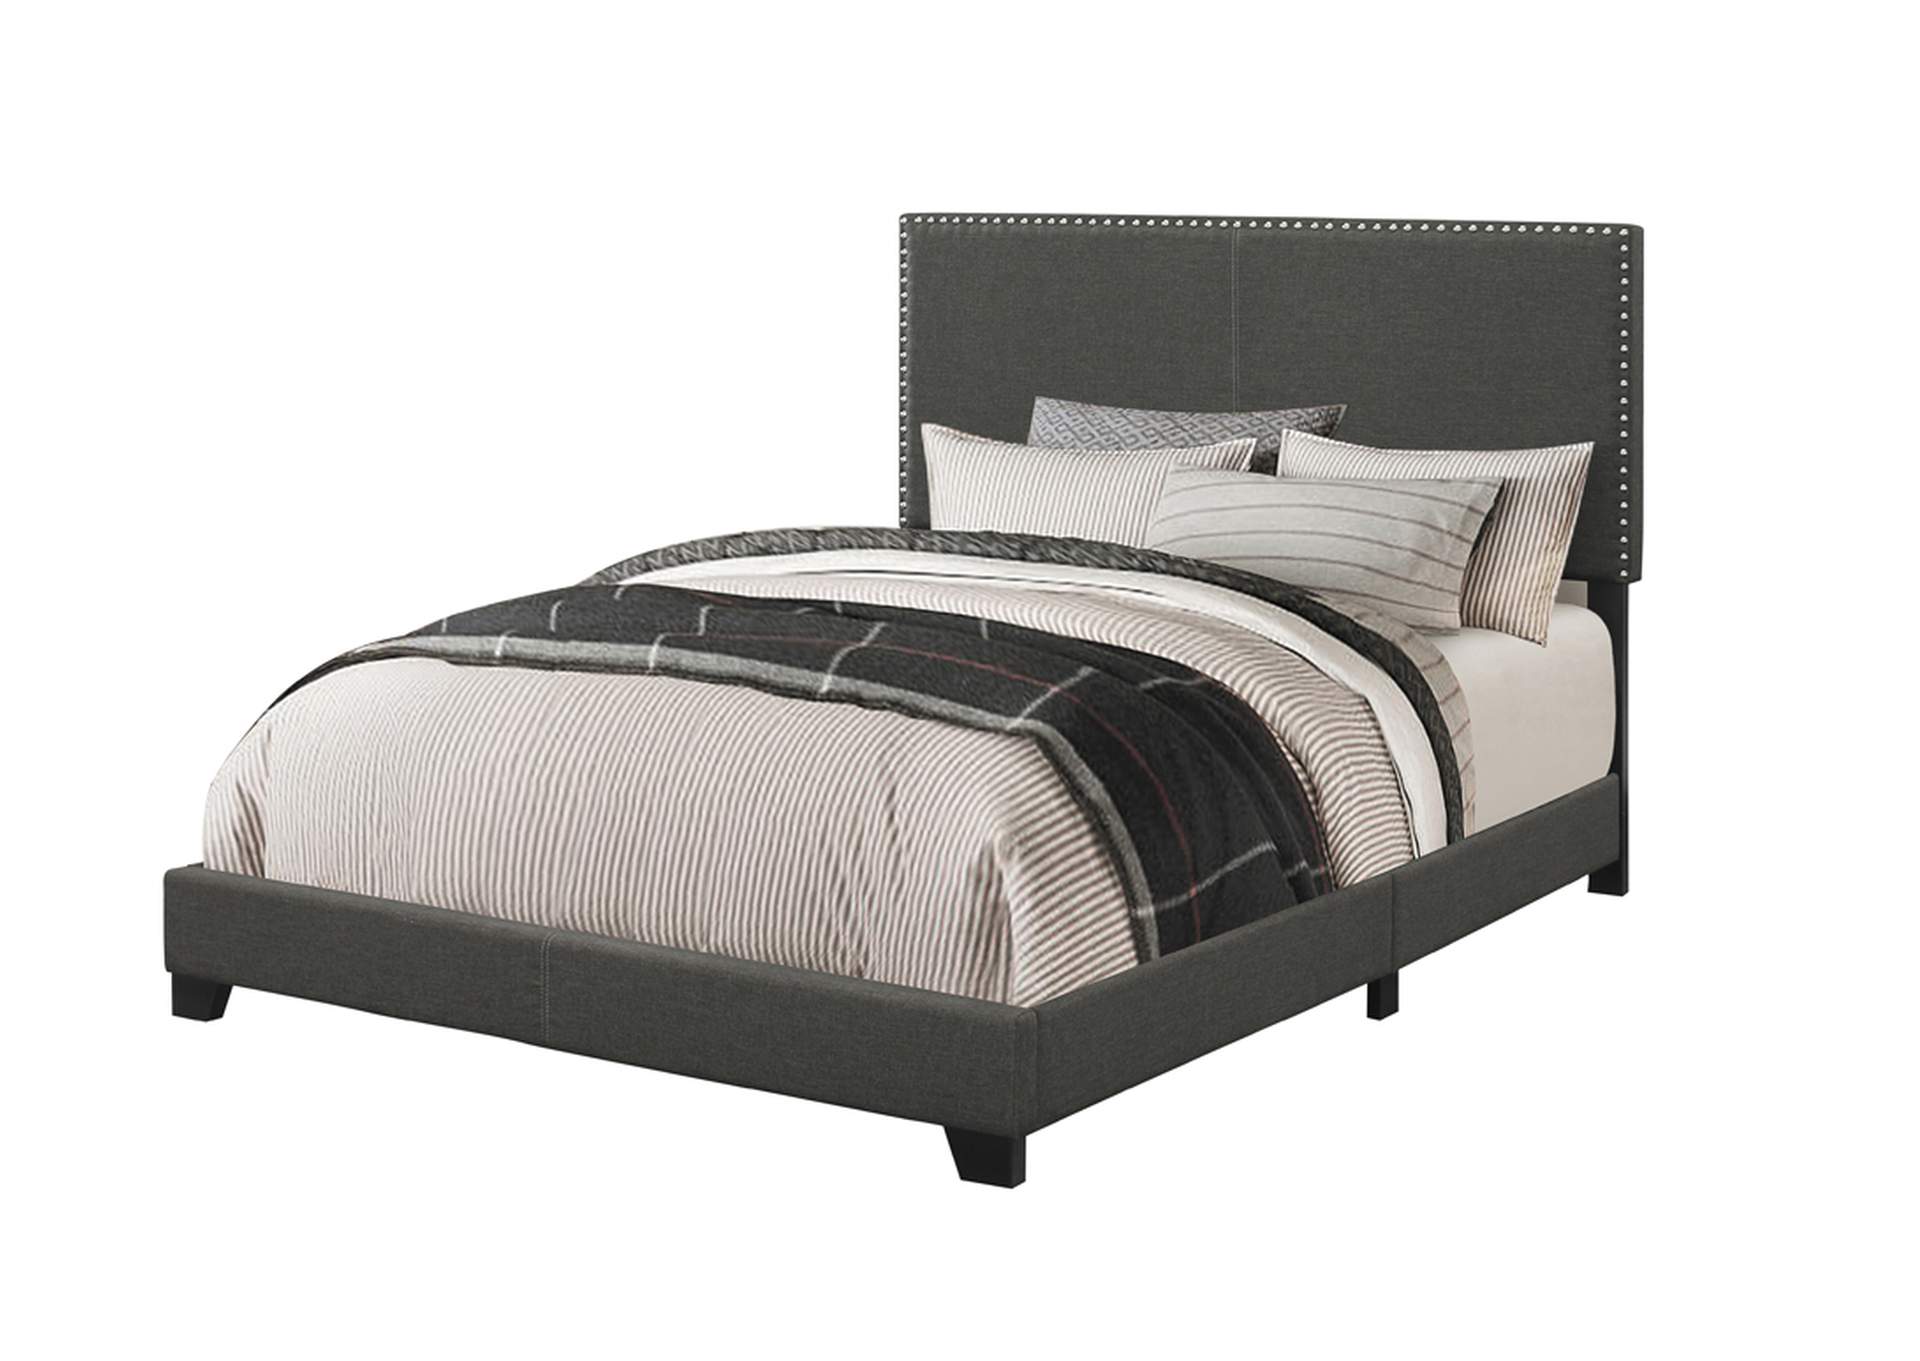 Boyd Full Upholstered Bed with Nailhead Trim Charcoal,Coaster Furniture